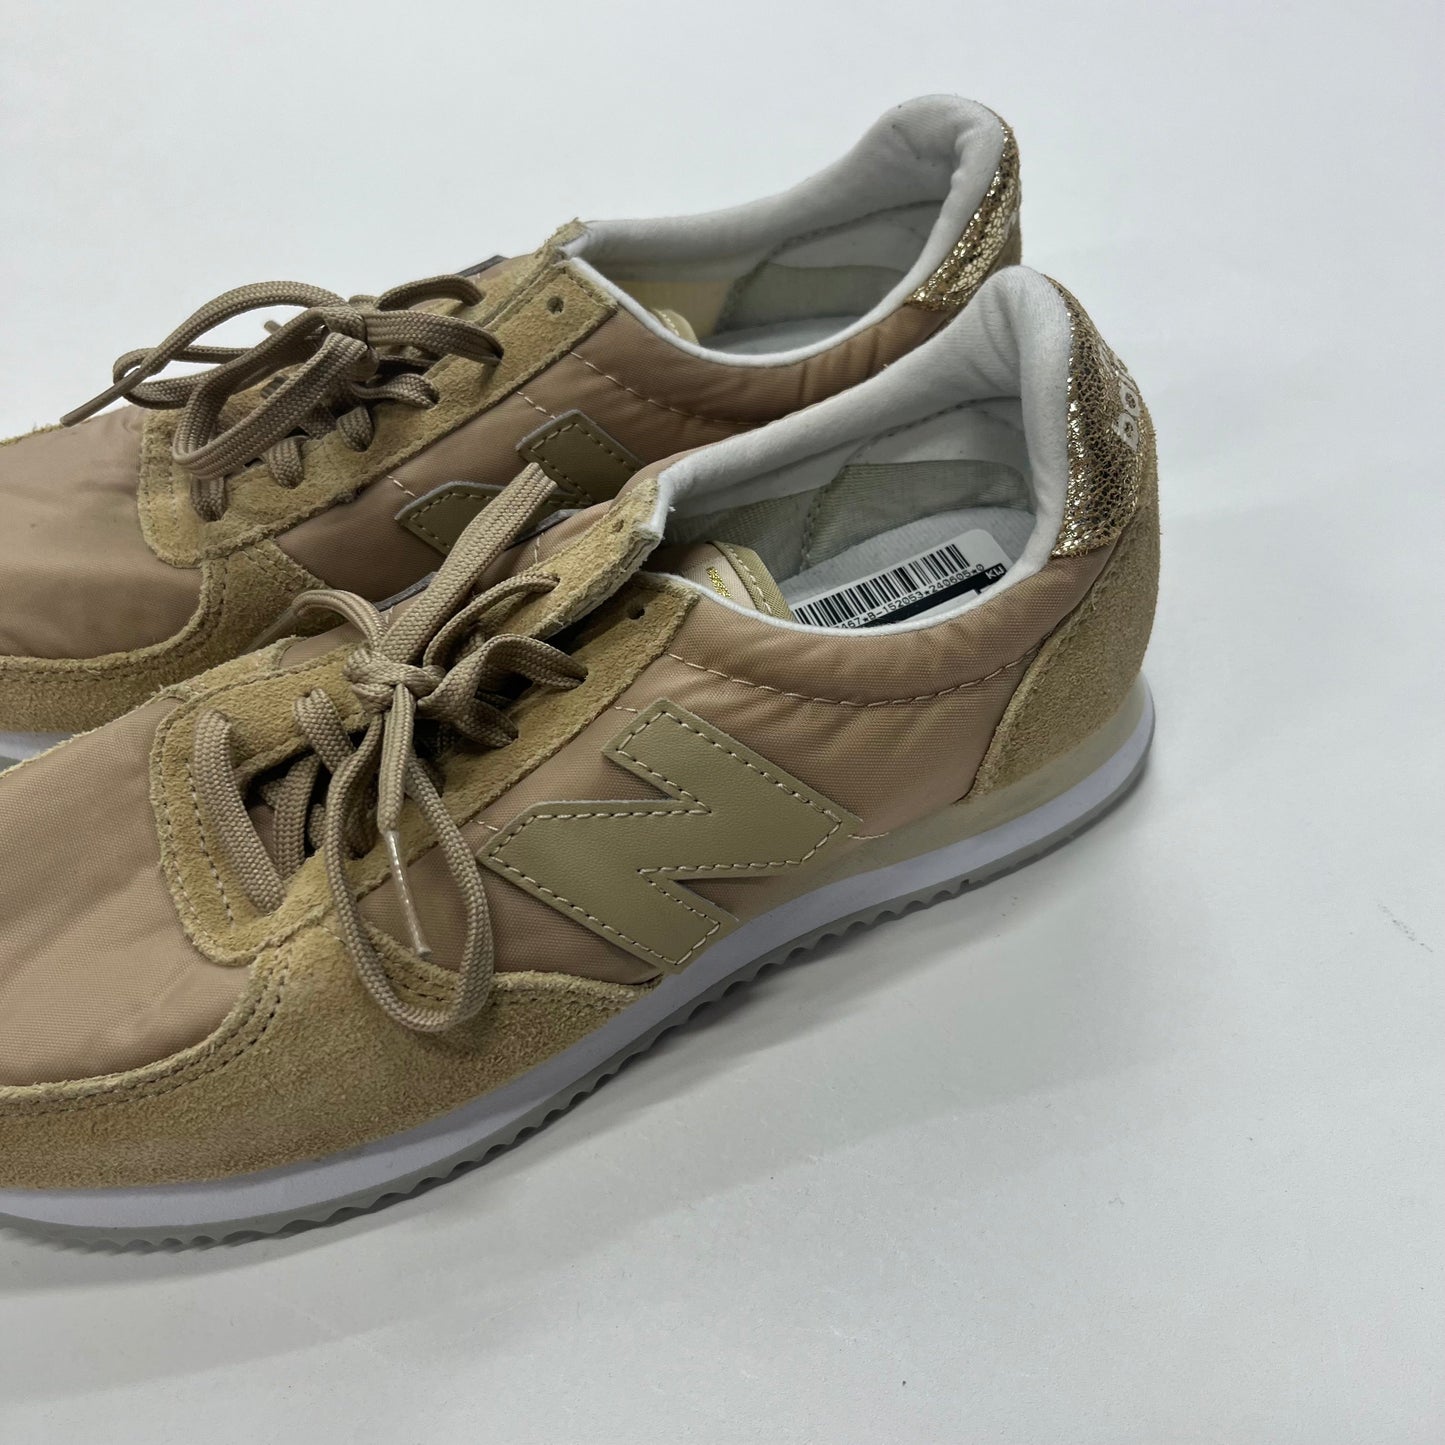 Tan Shoes Athletic New Balance, Size 6.5